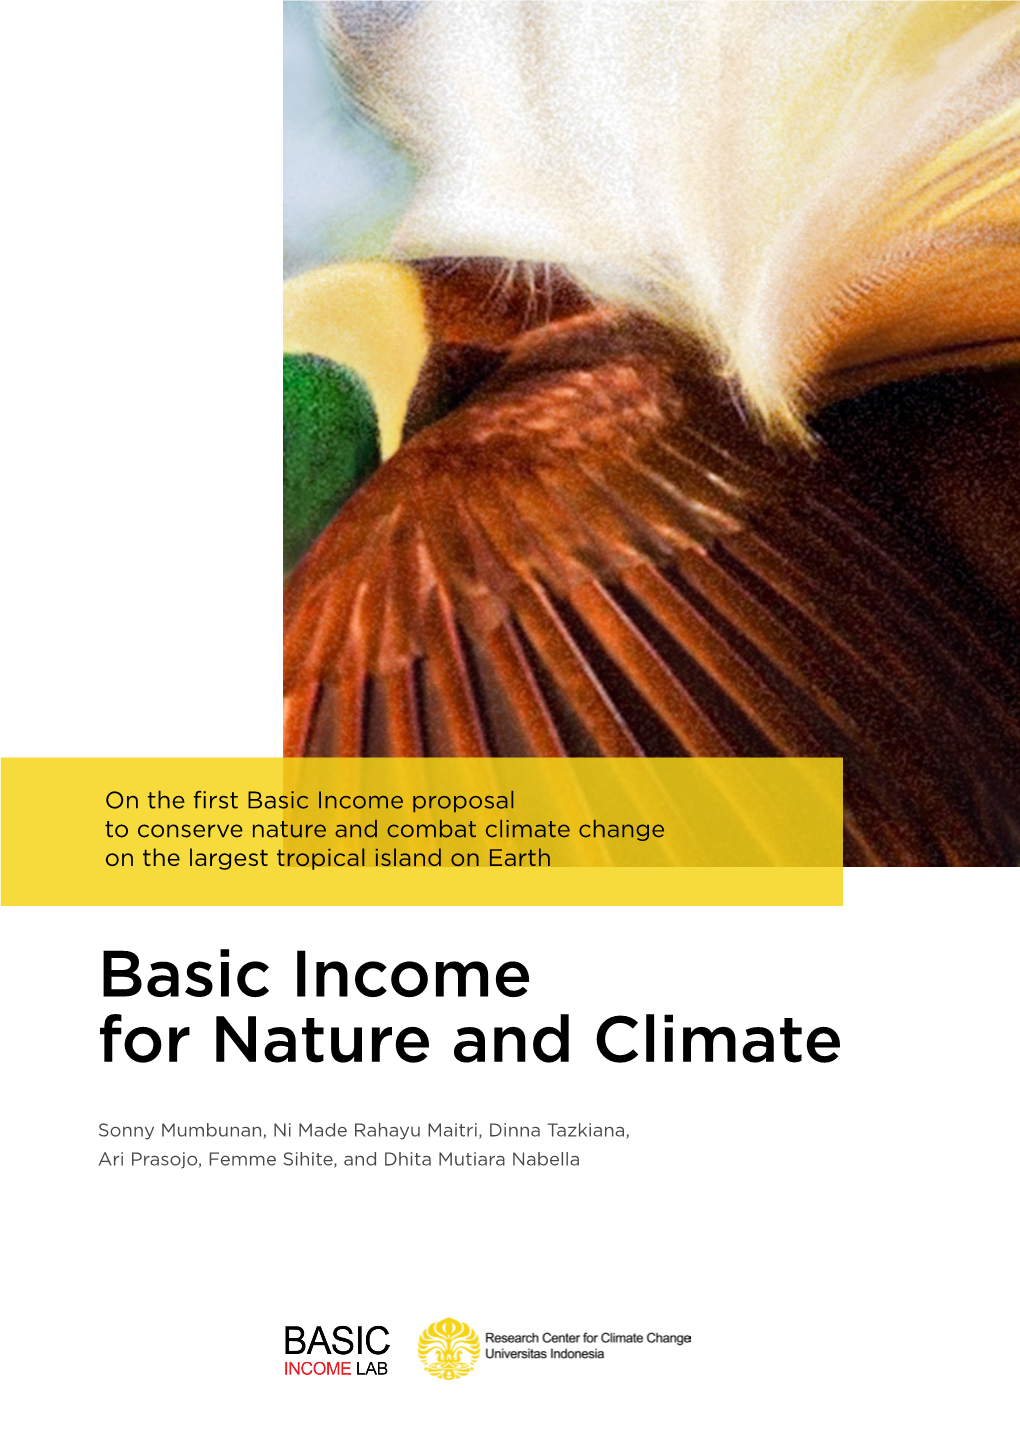 Basic Income for Nature and Climate